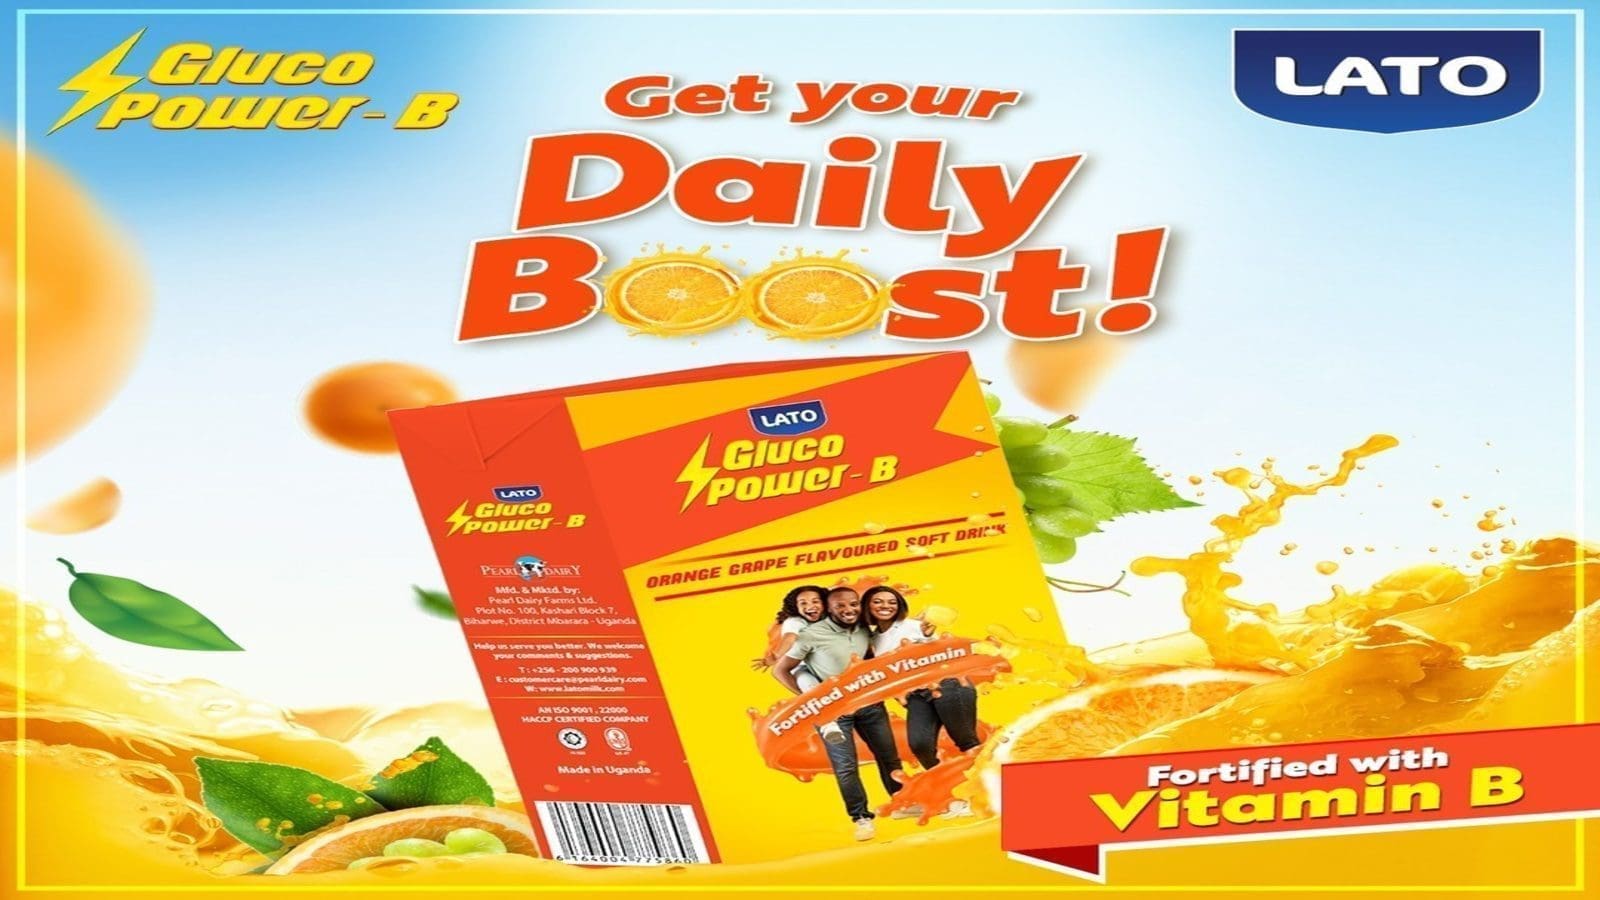 Lato milk brand launches energy drink fortified with Vitamin B